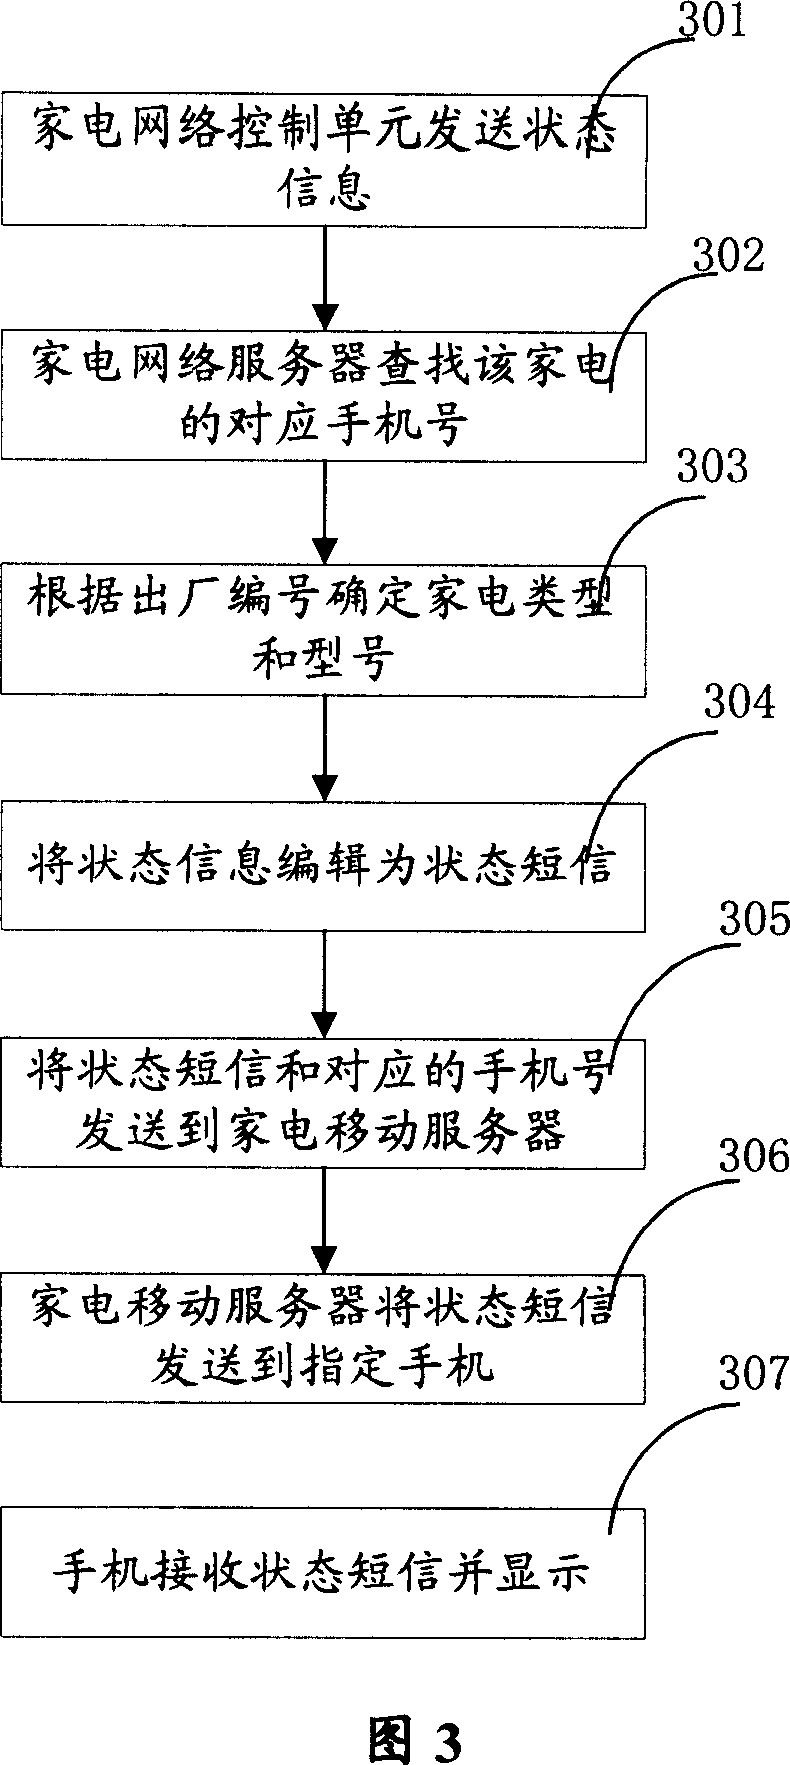 System and device of short message remote controlled network household appliance